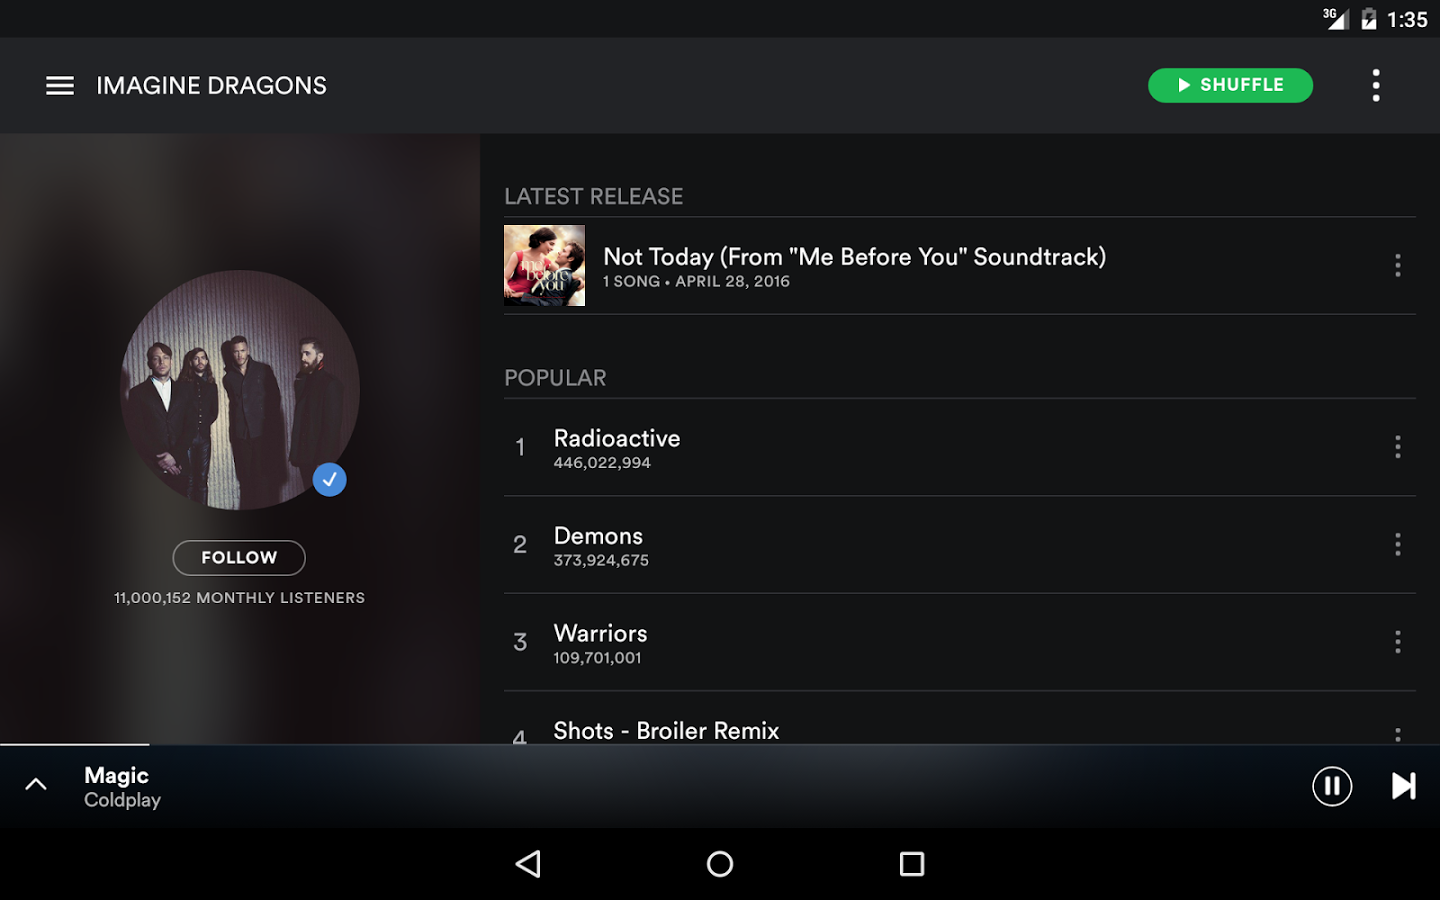 spotify cracked apk android 8.1